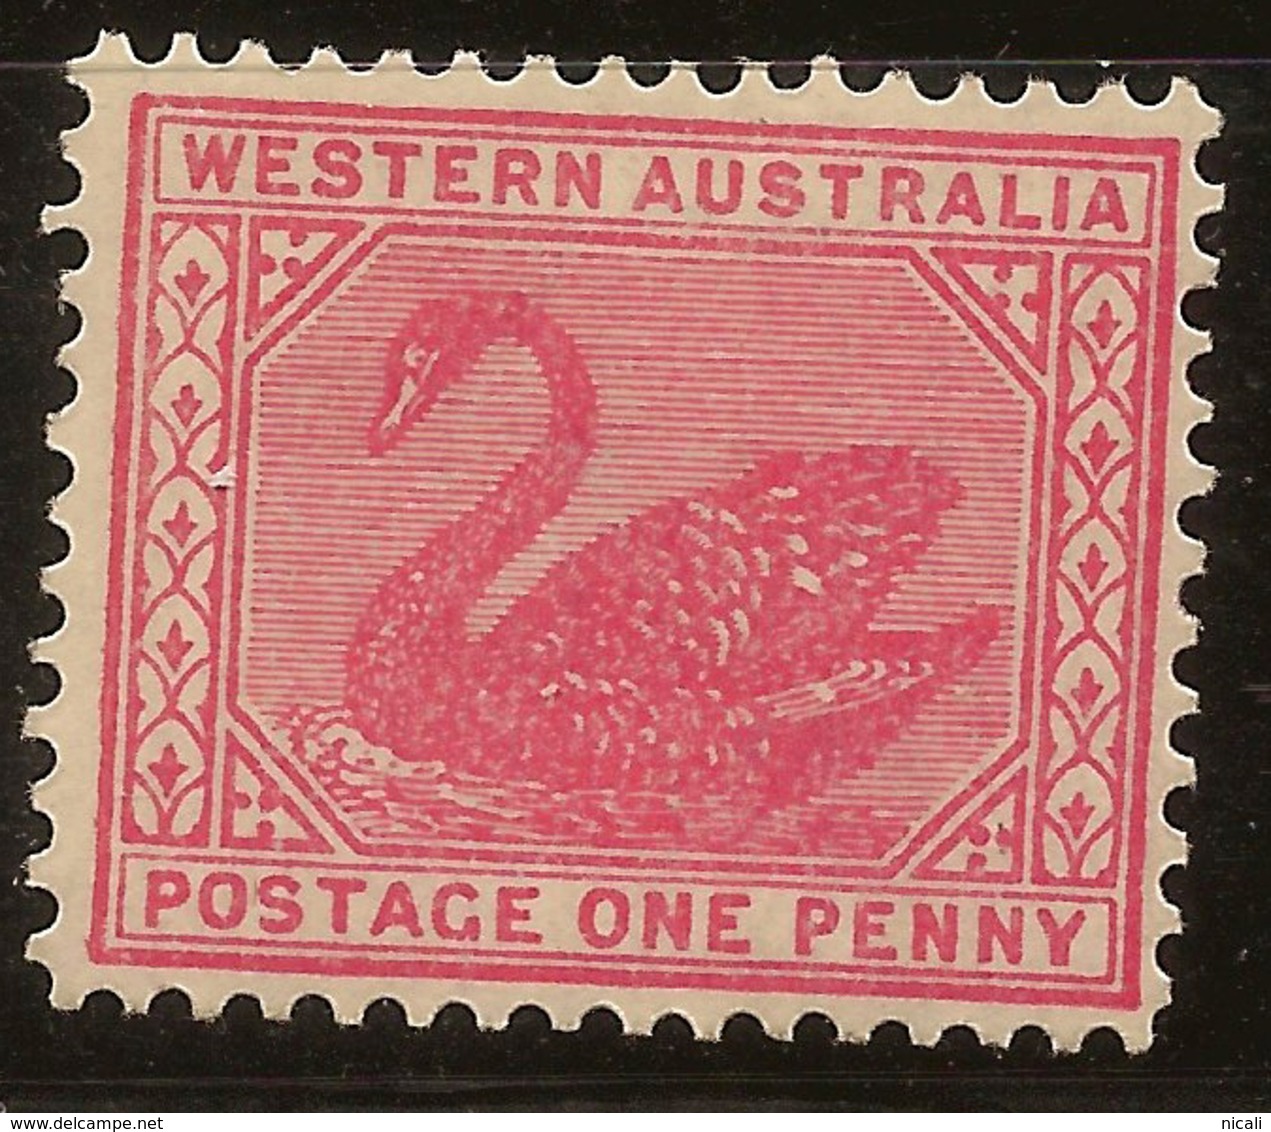 WESTERN AUSTRALIA 1902 1d Swan SG 117a HM #AME56 - Mint Stamps